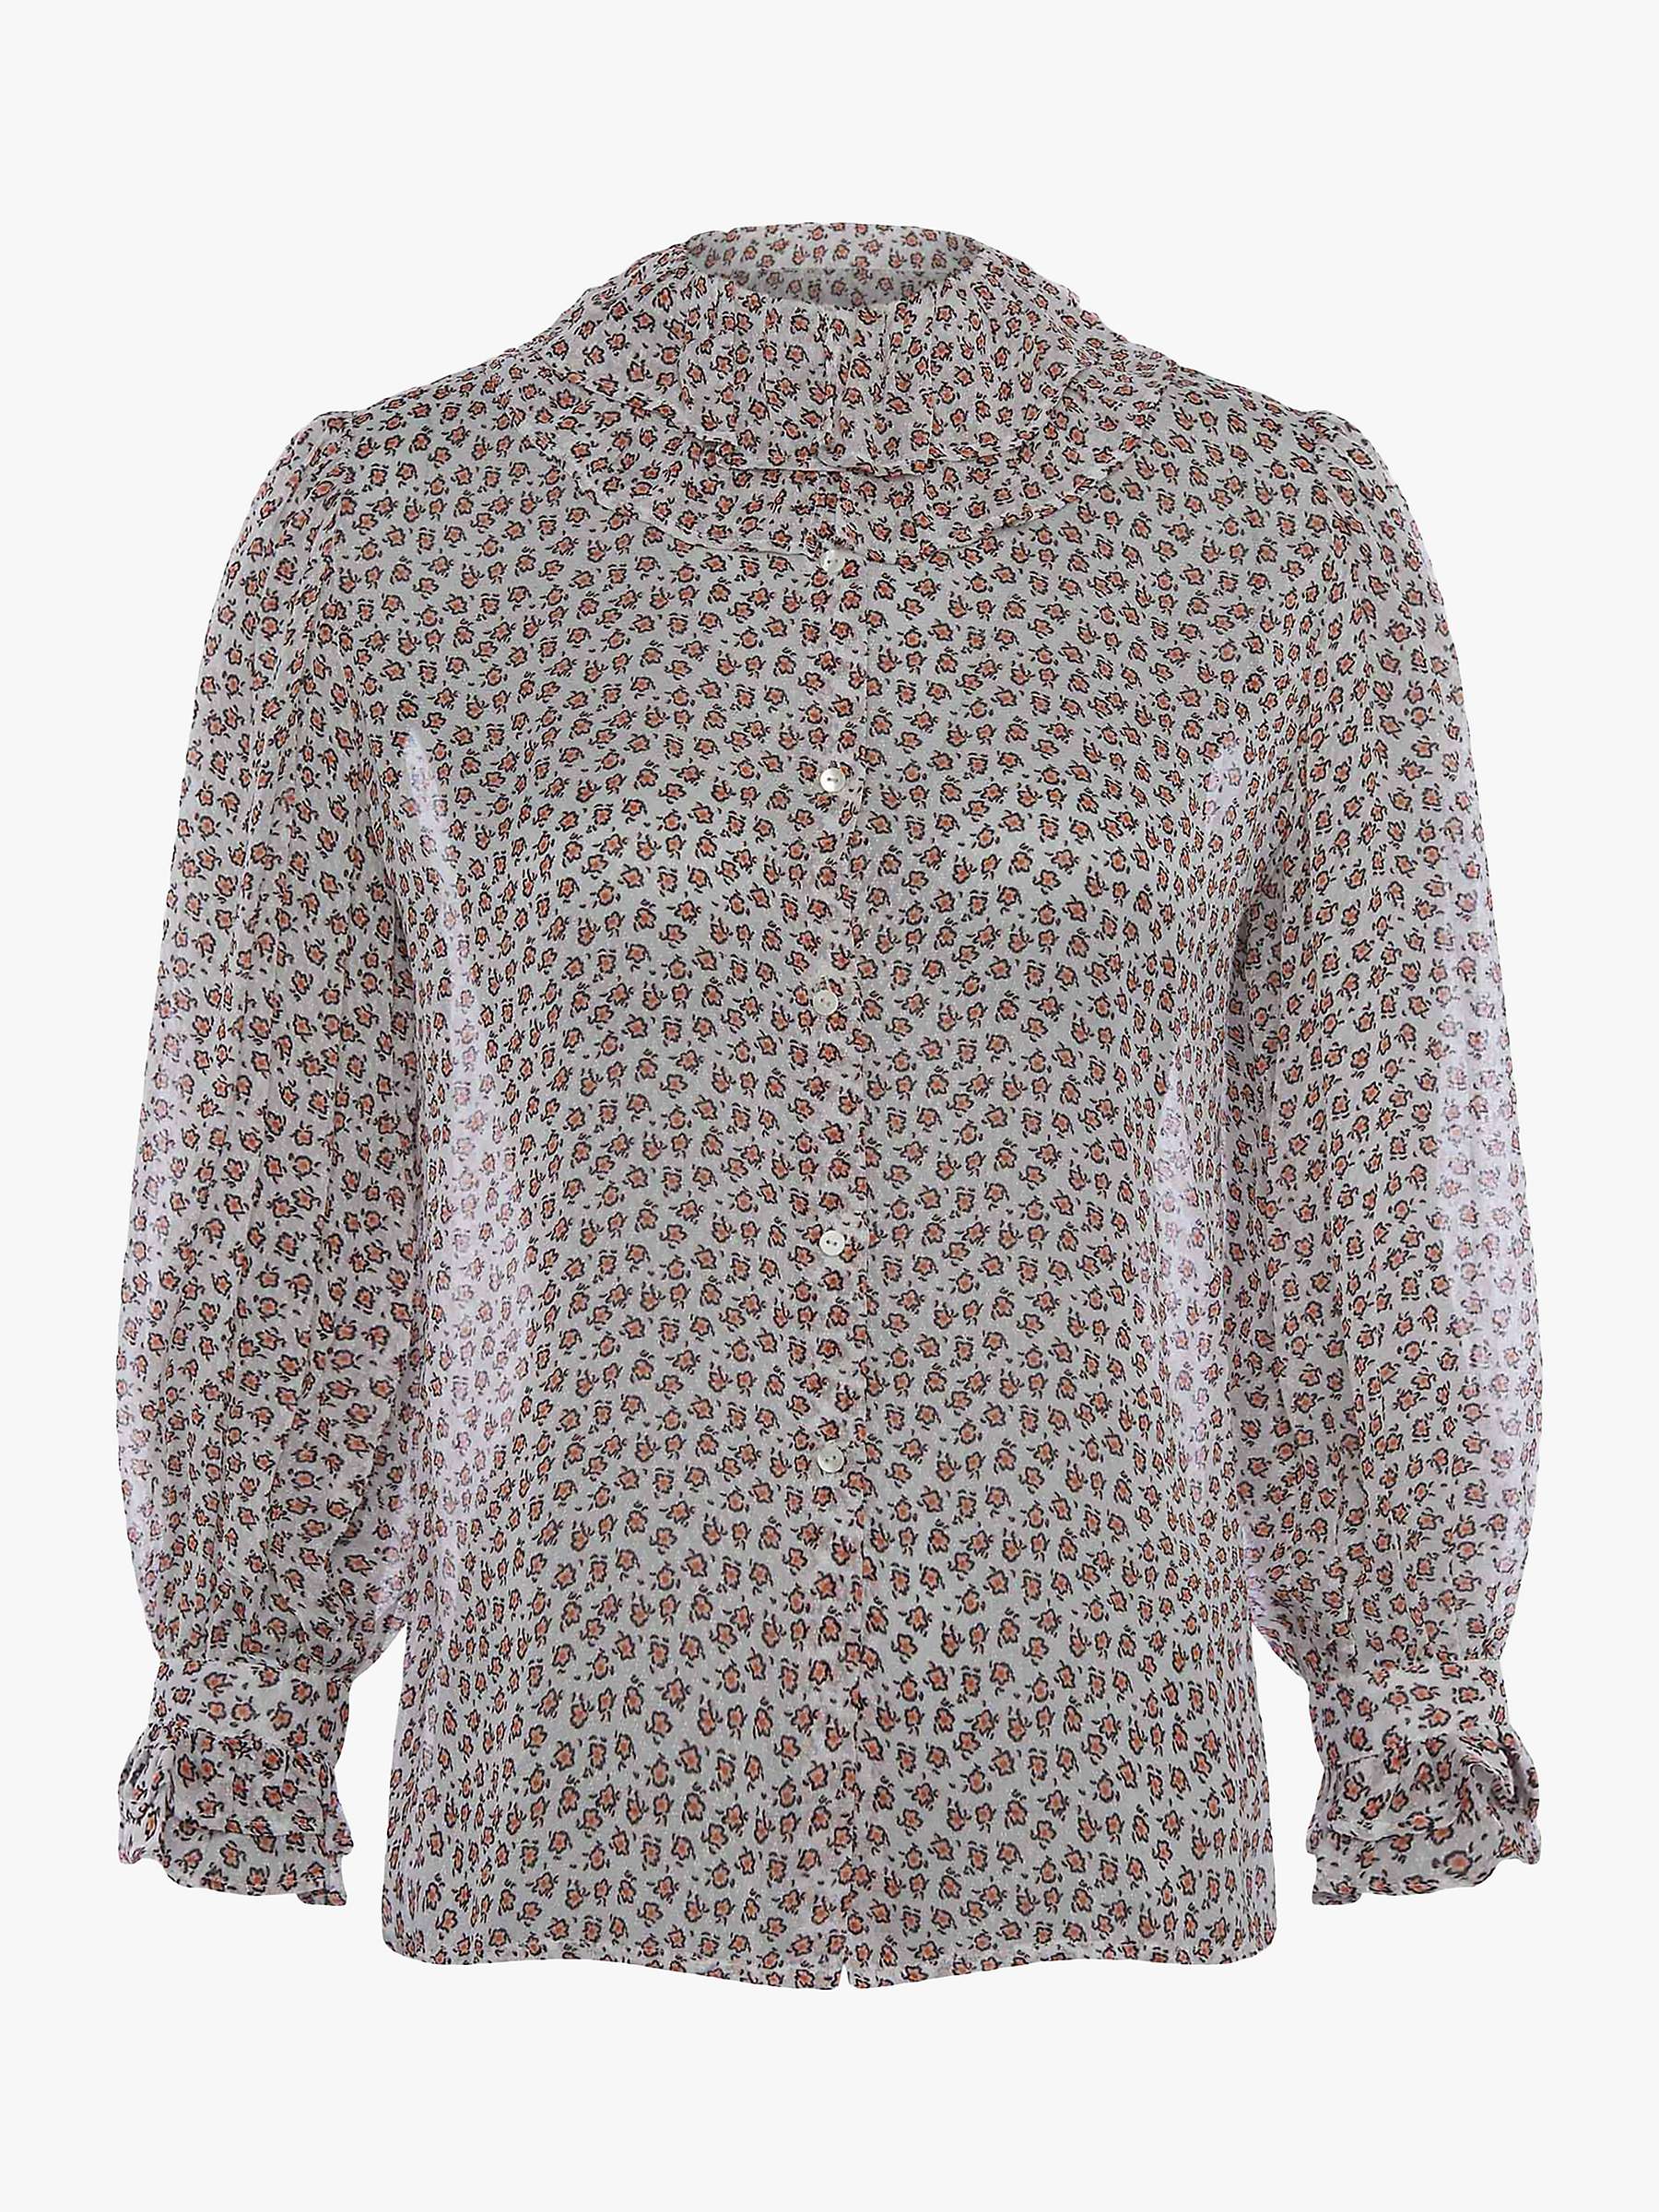 Buy French Connection Aura Ditsy Dobbie Blouse, Summer White/Multi Online at johnlewis.com